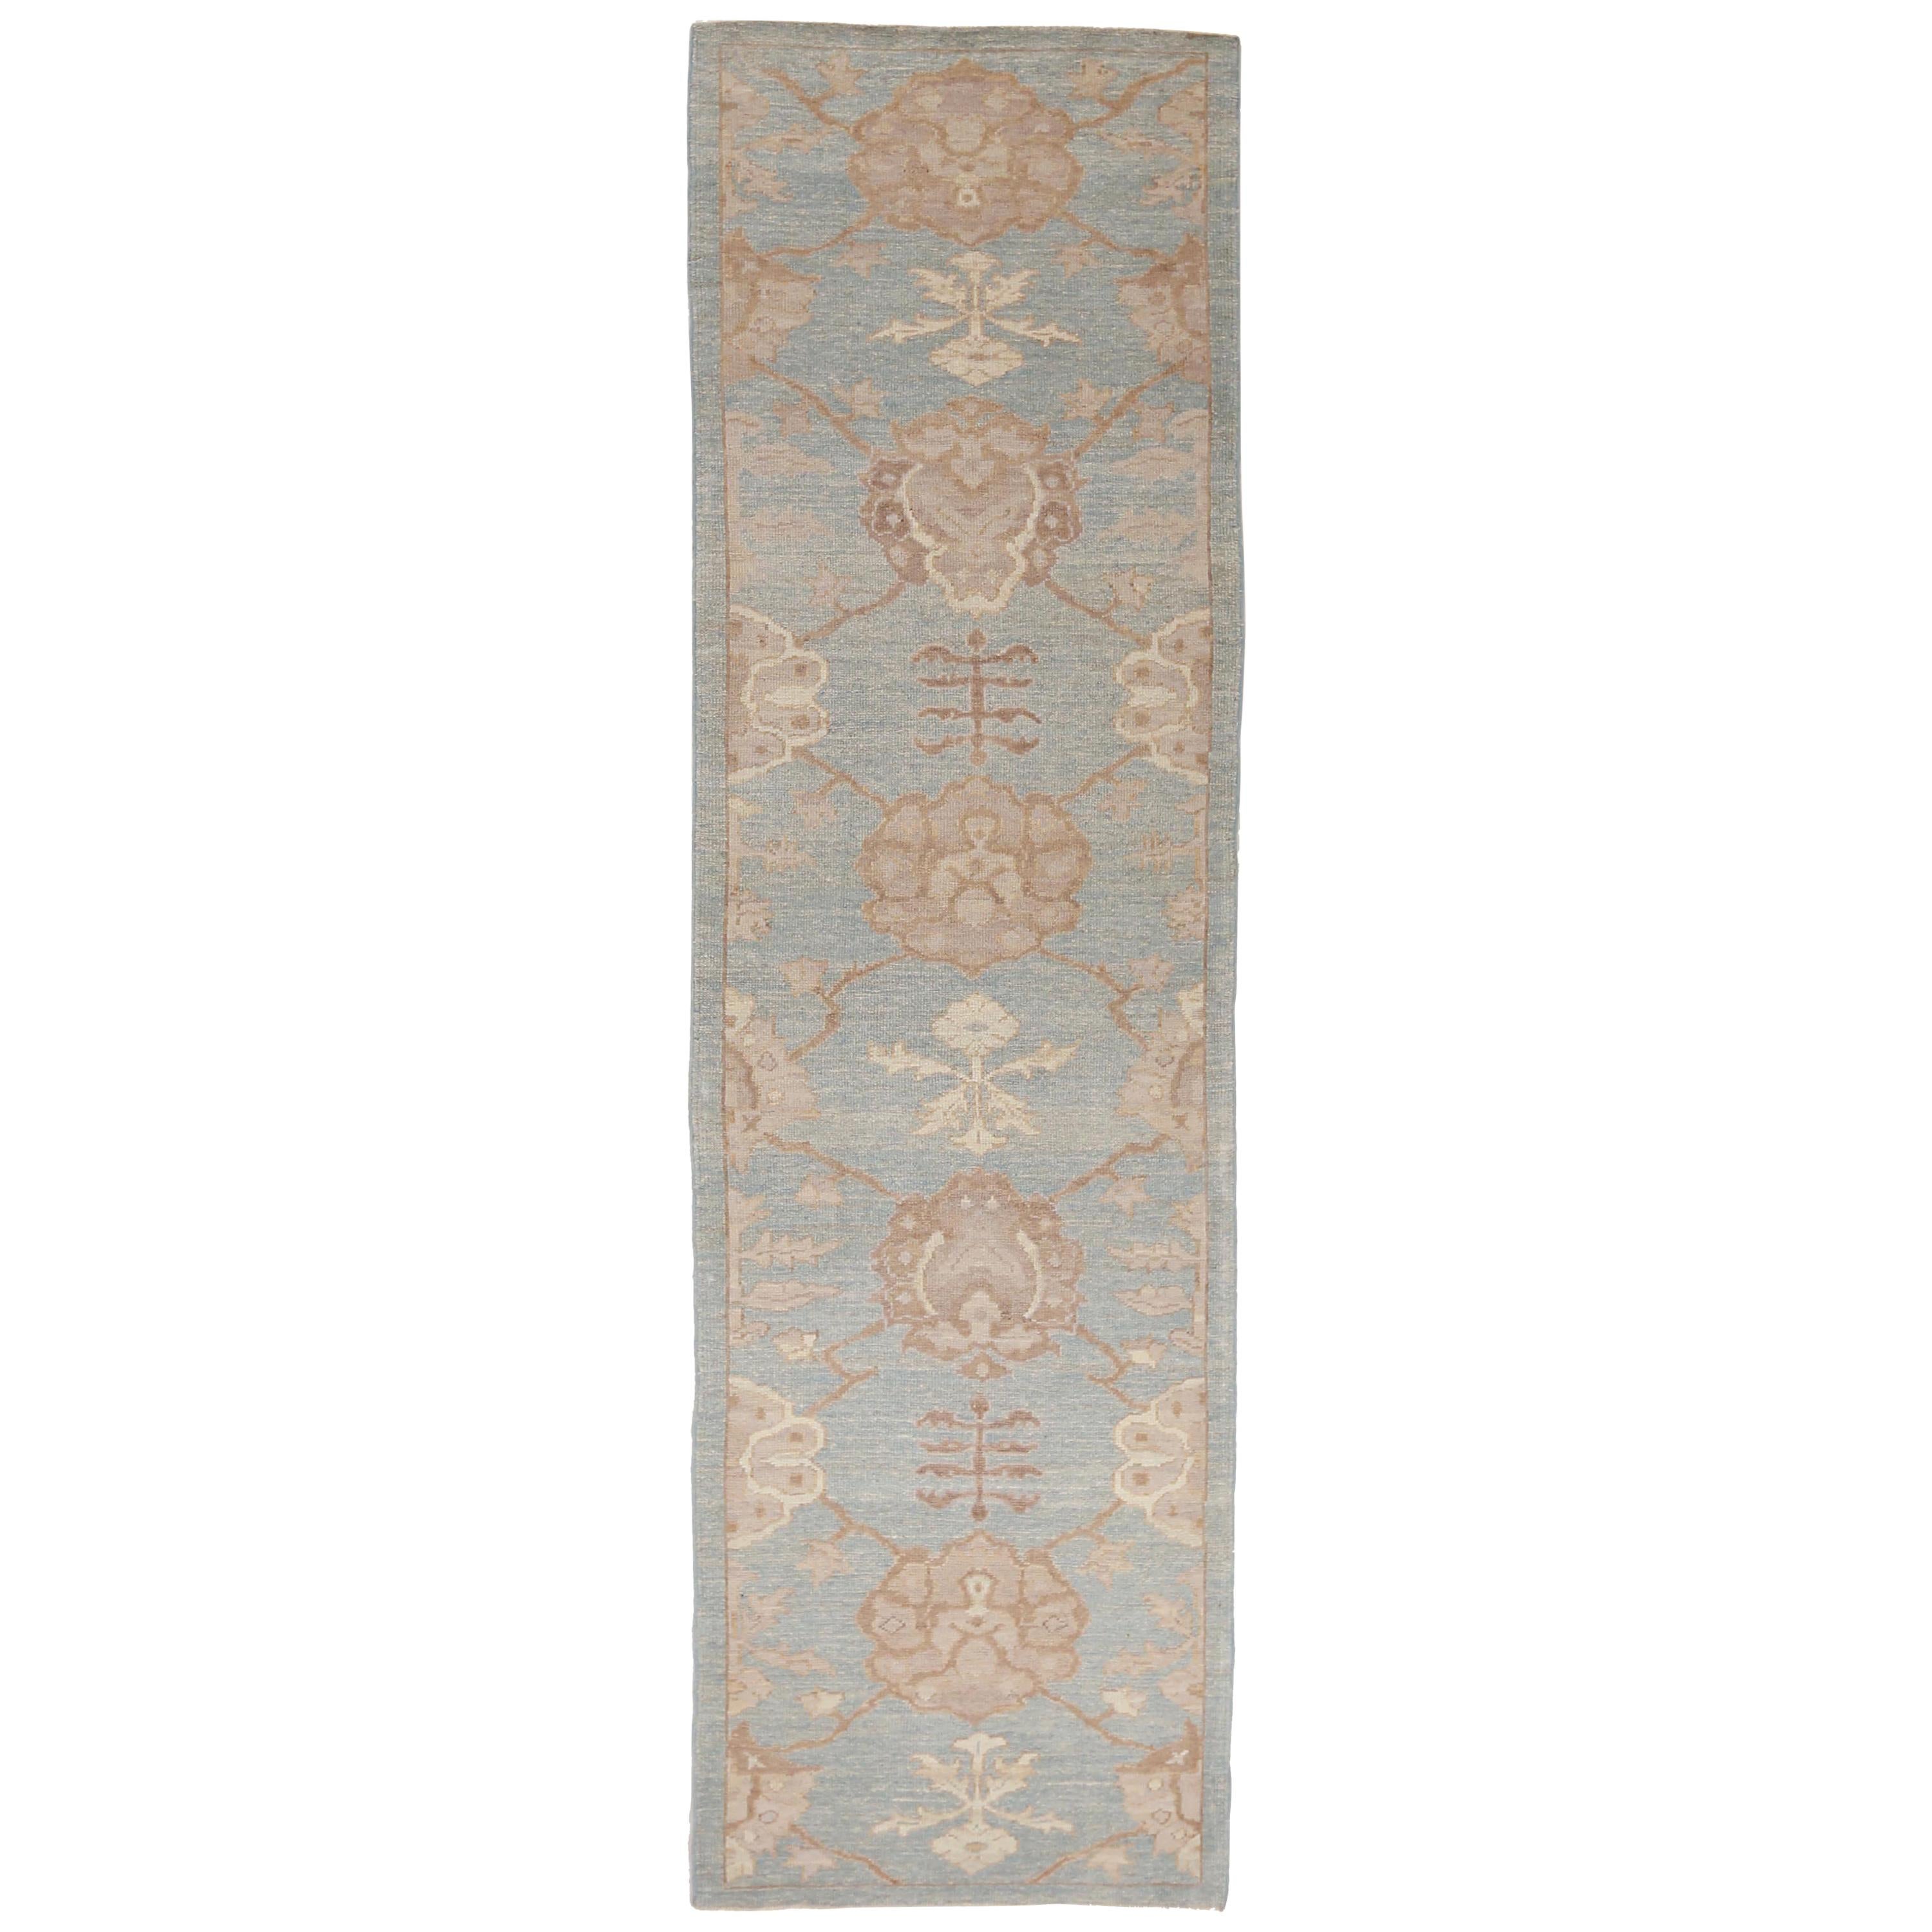 Contemporary Oushak Persian Rug in Blue with Brown and Beige Flower Motif